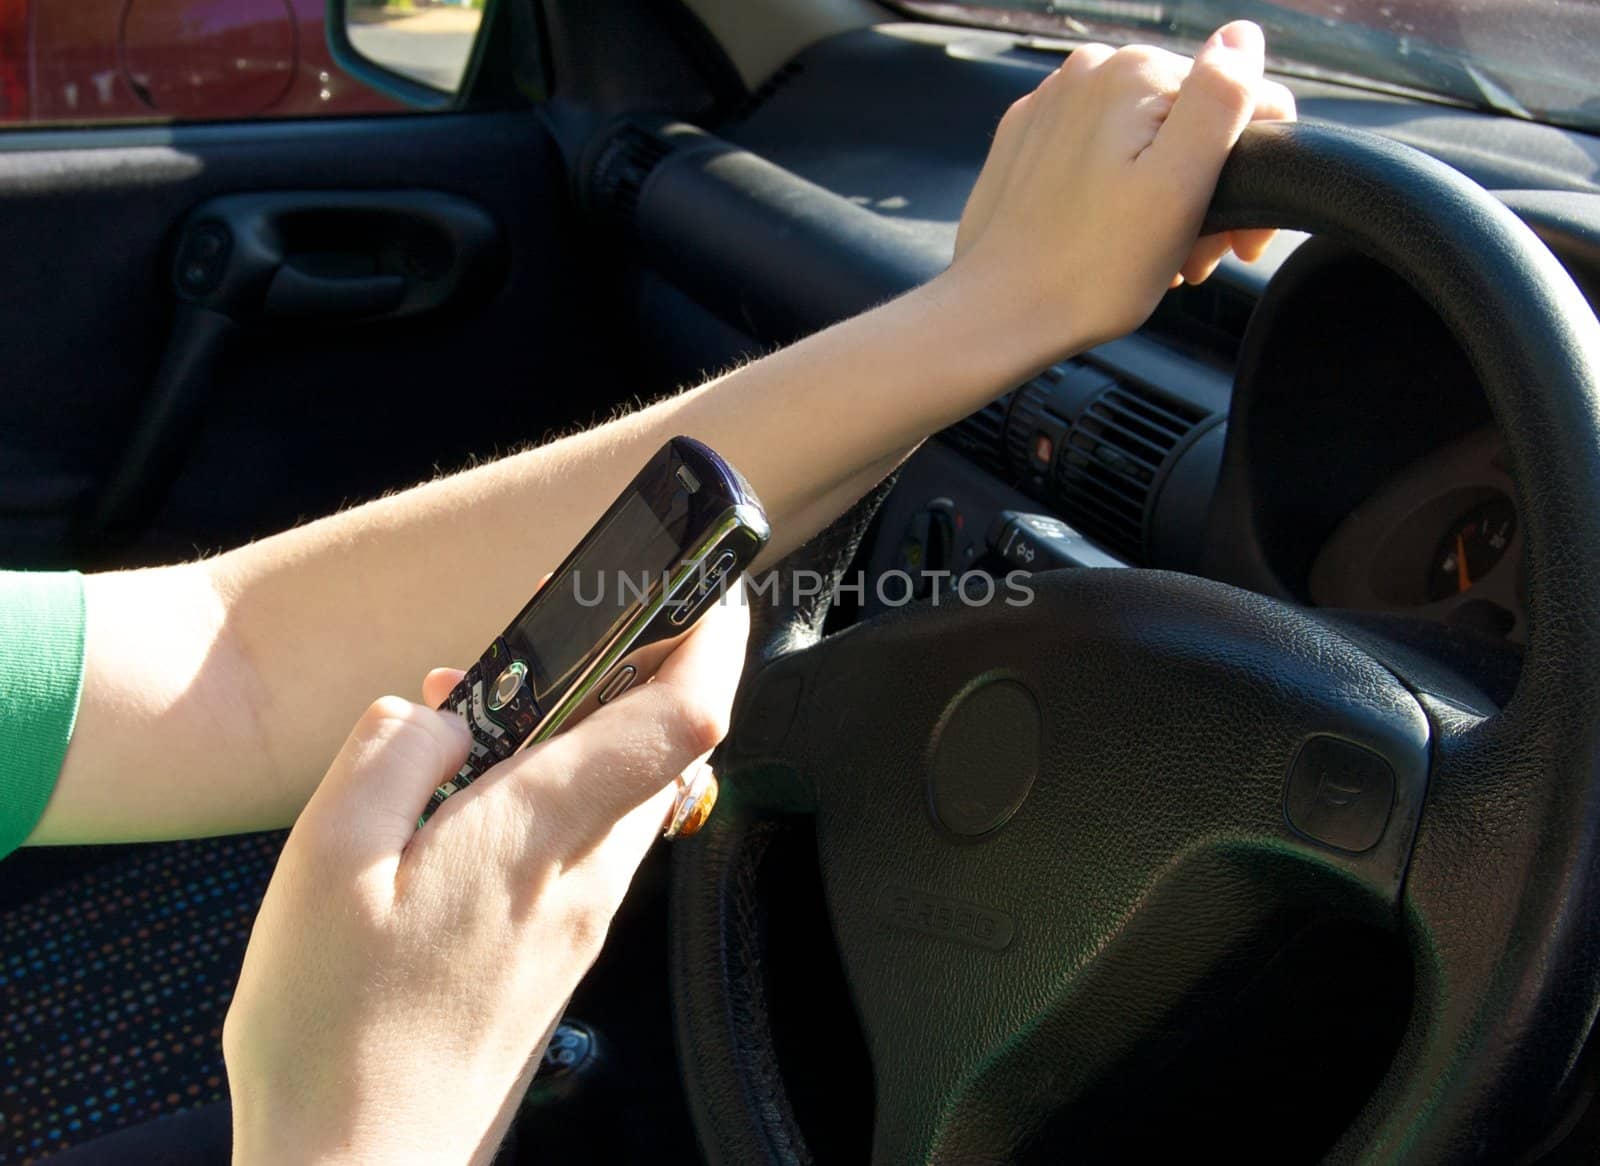 Driving while texting by gfairbairn